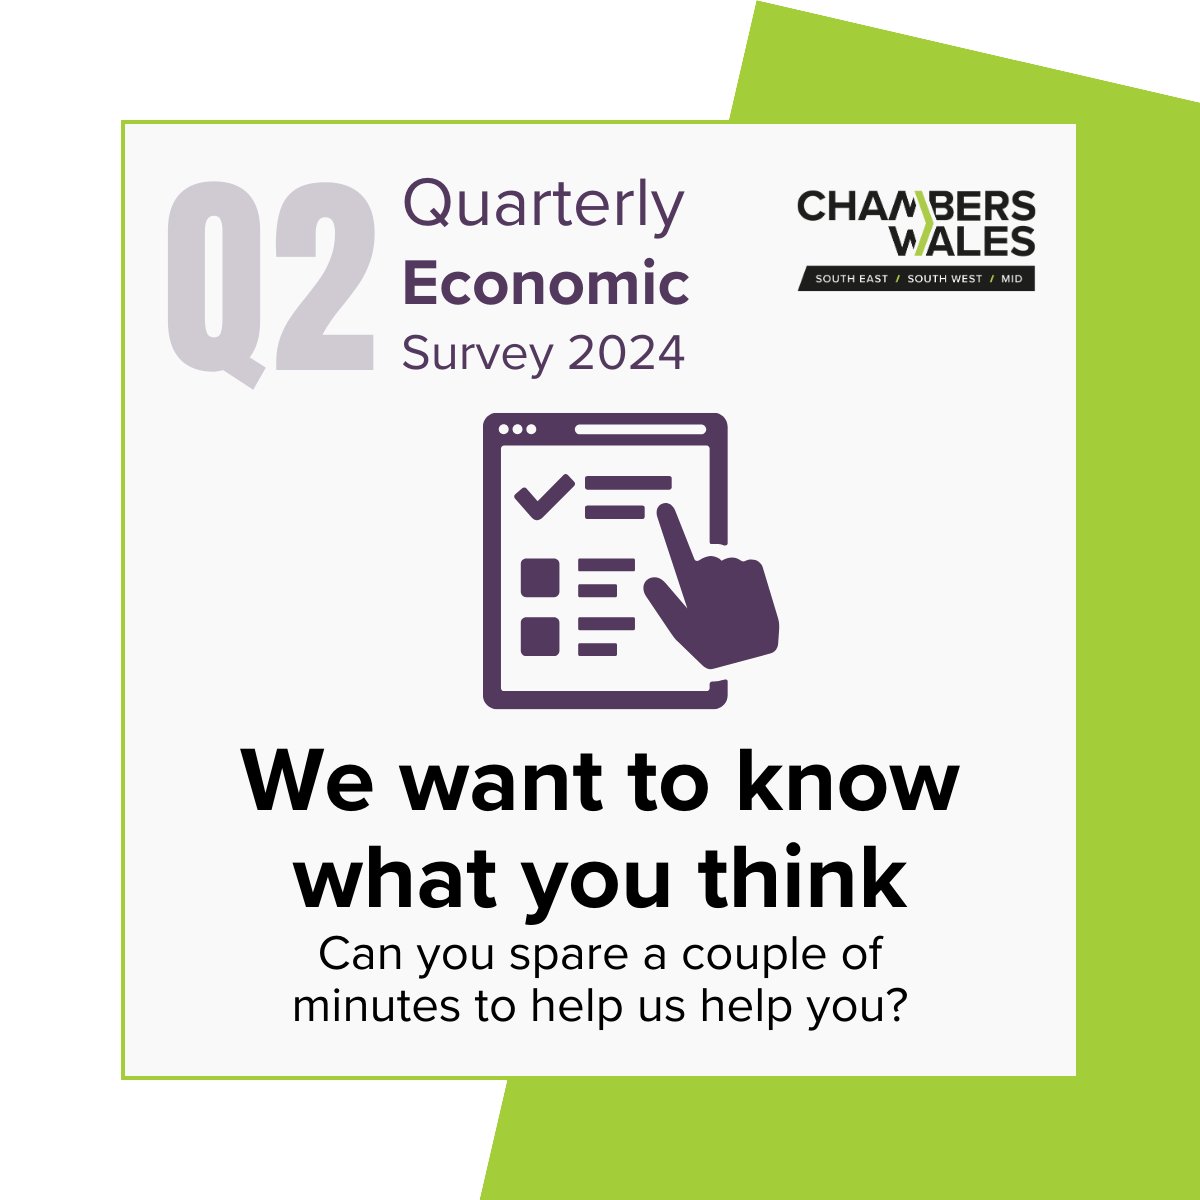 Let us know what your business is experiencing this quarter in our Quarterly Economic Survey: surveymonkey.com/r/LSB2WFY